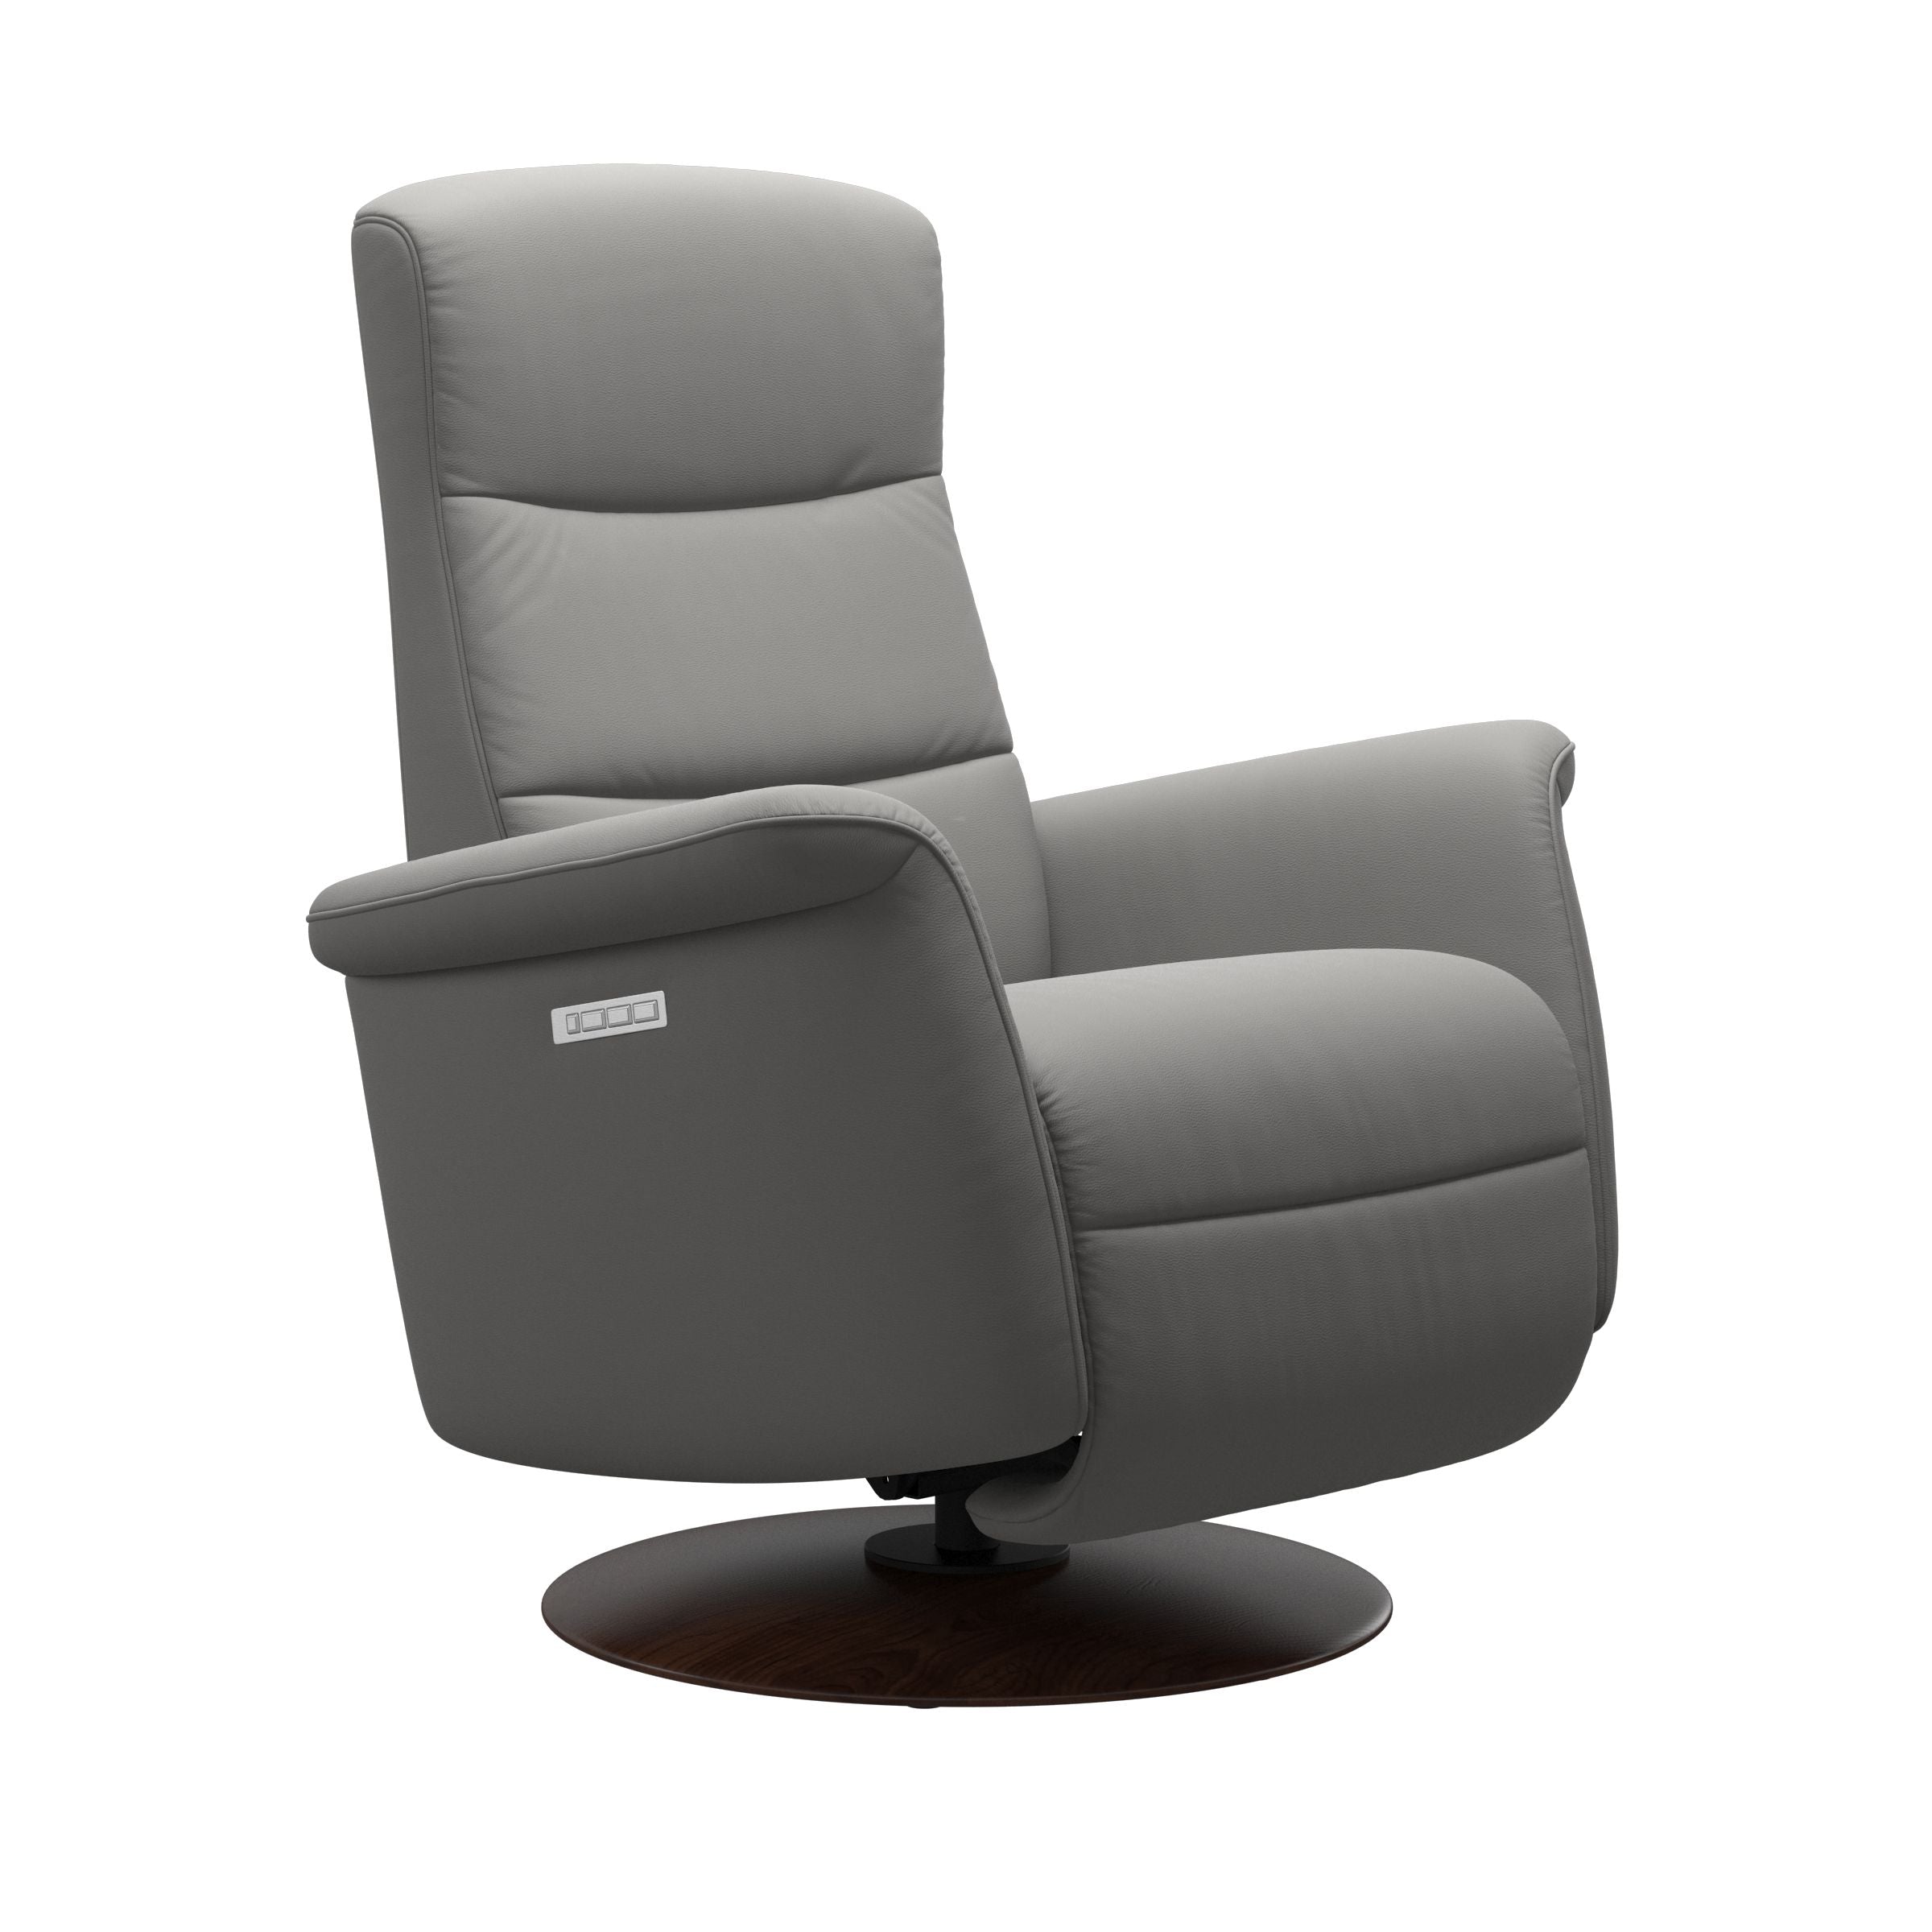 Stressless Mike Medium Recliner with Wood Moon Base